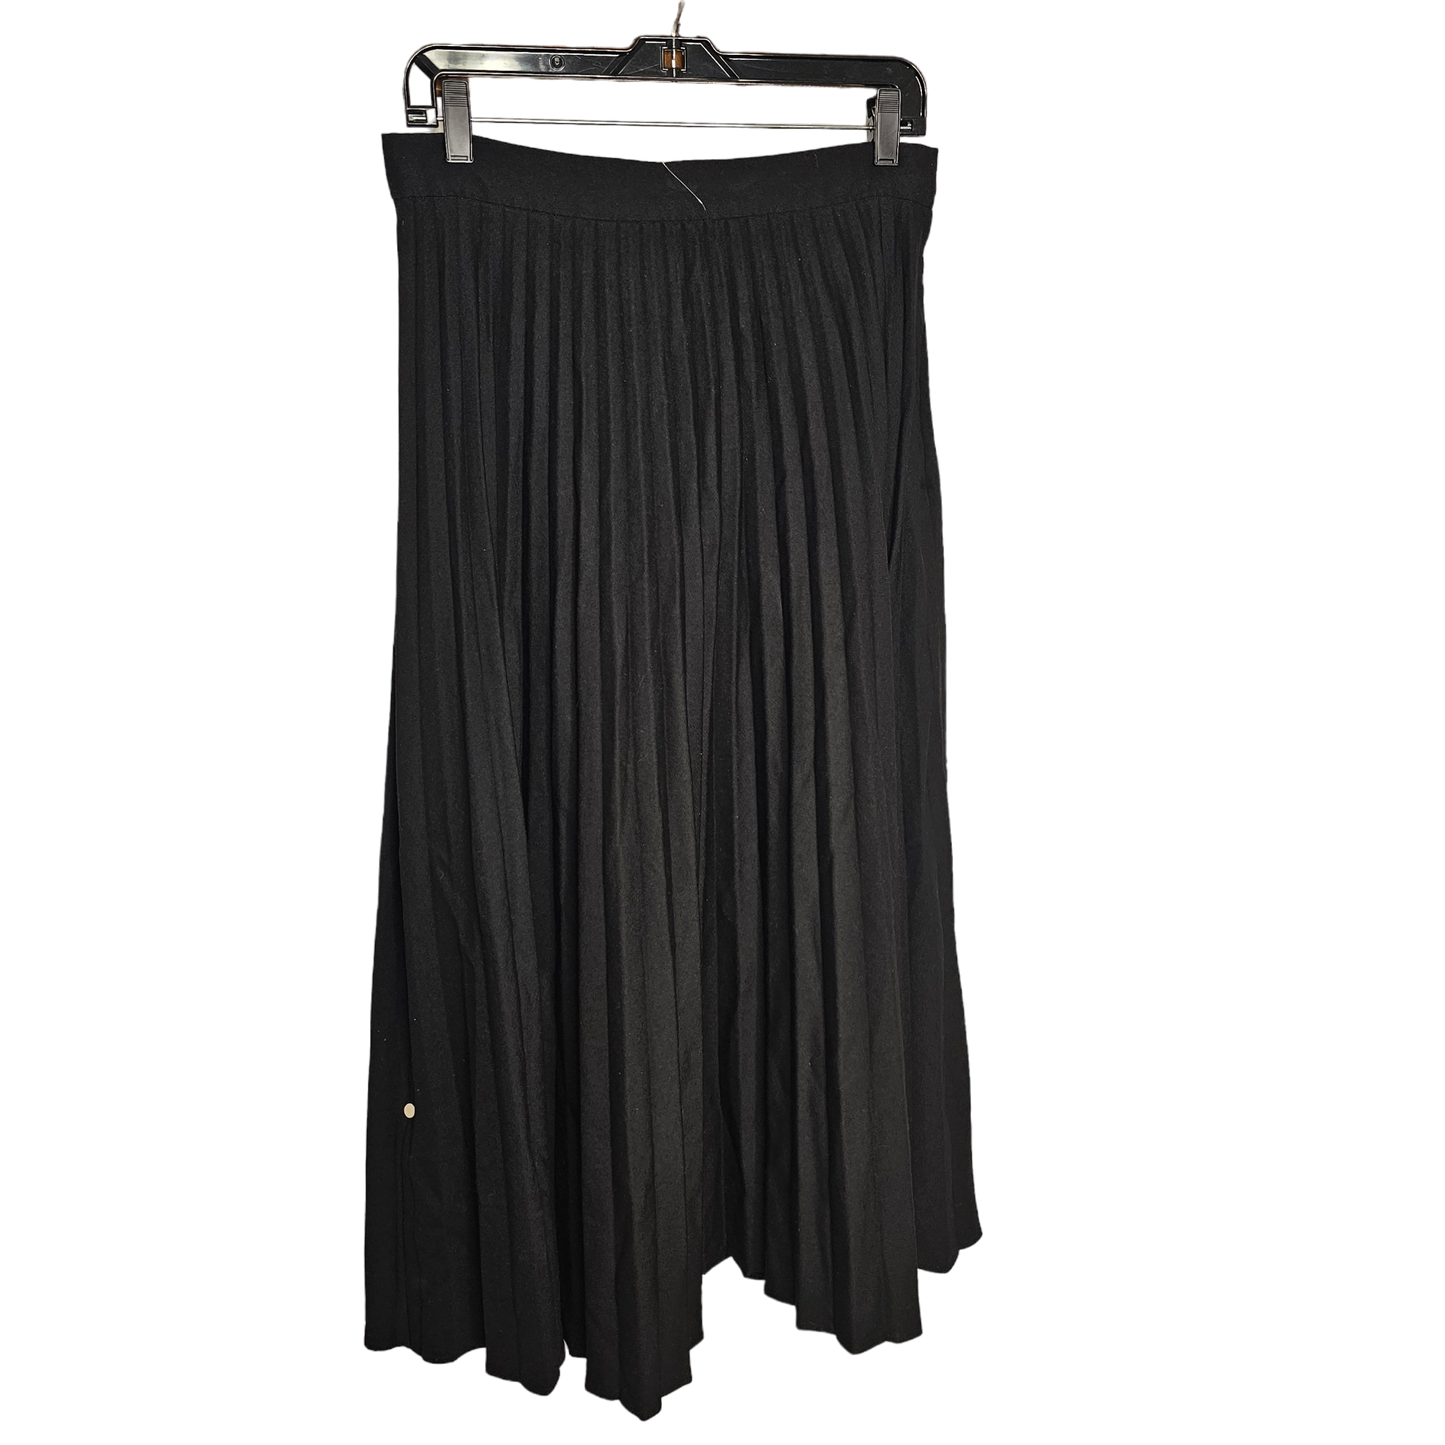 Skirt Maxi By H&m  Size: 10